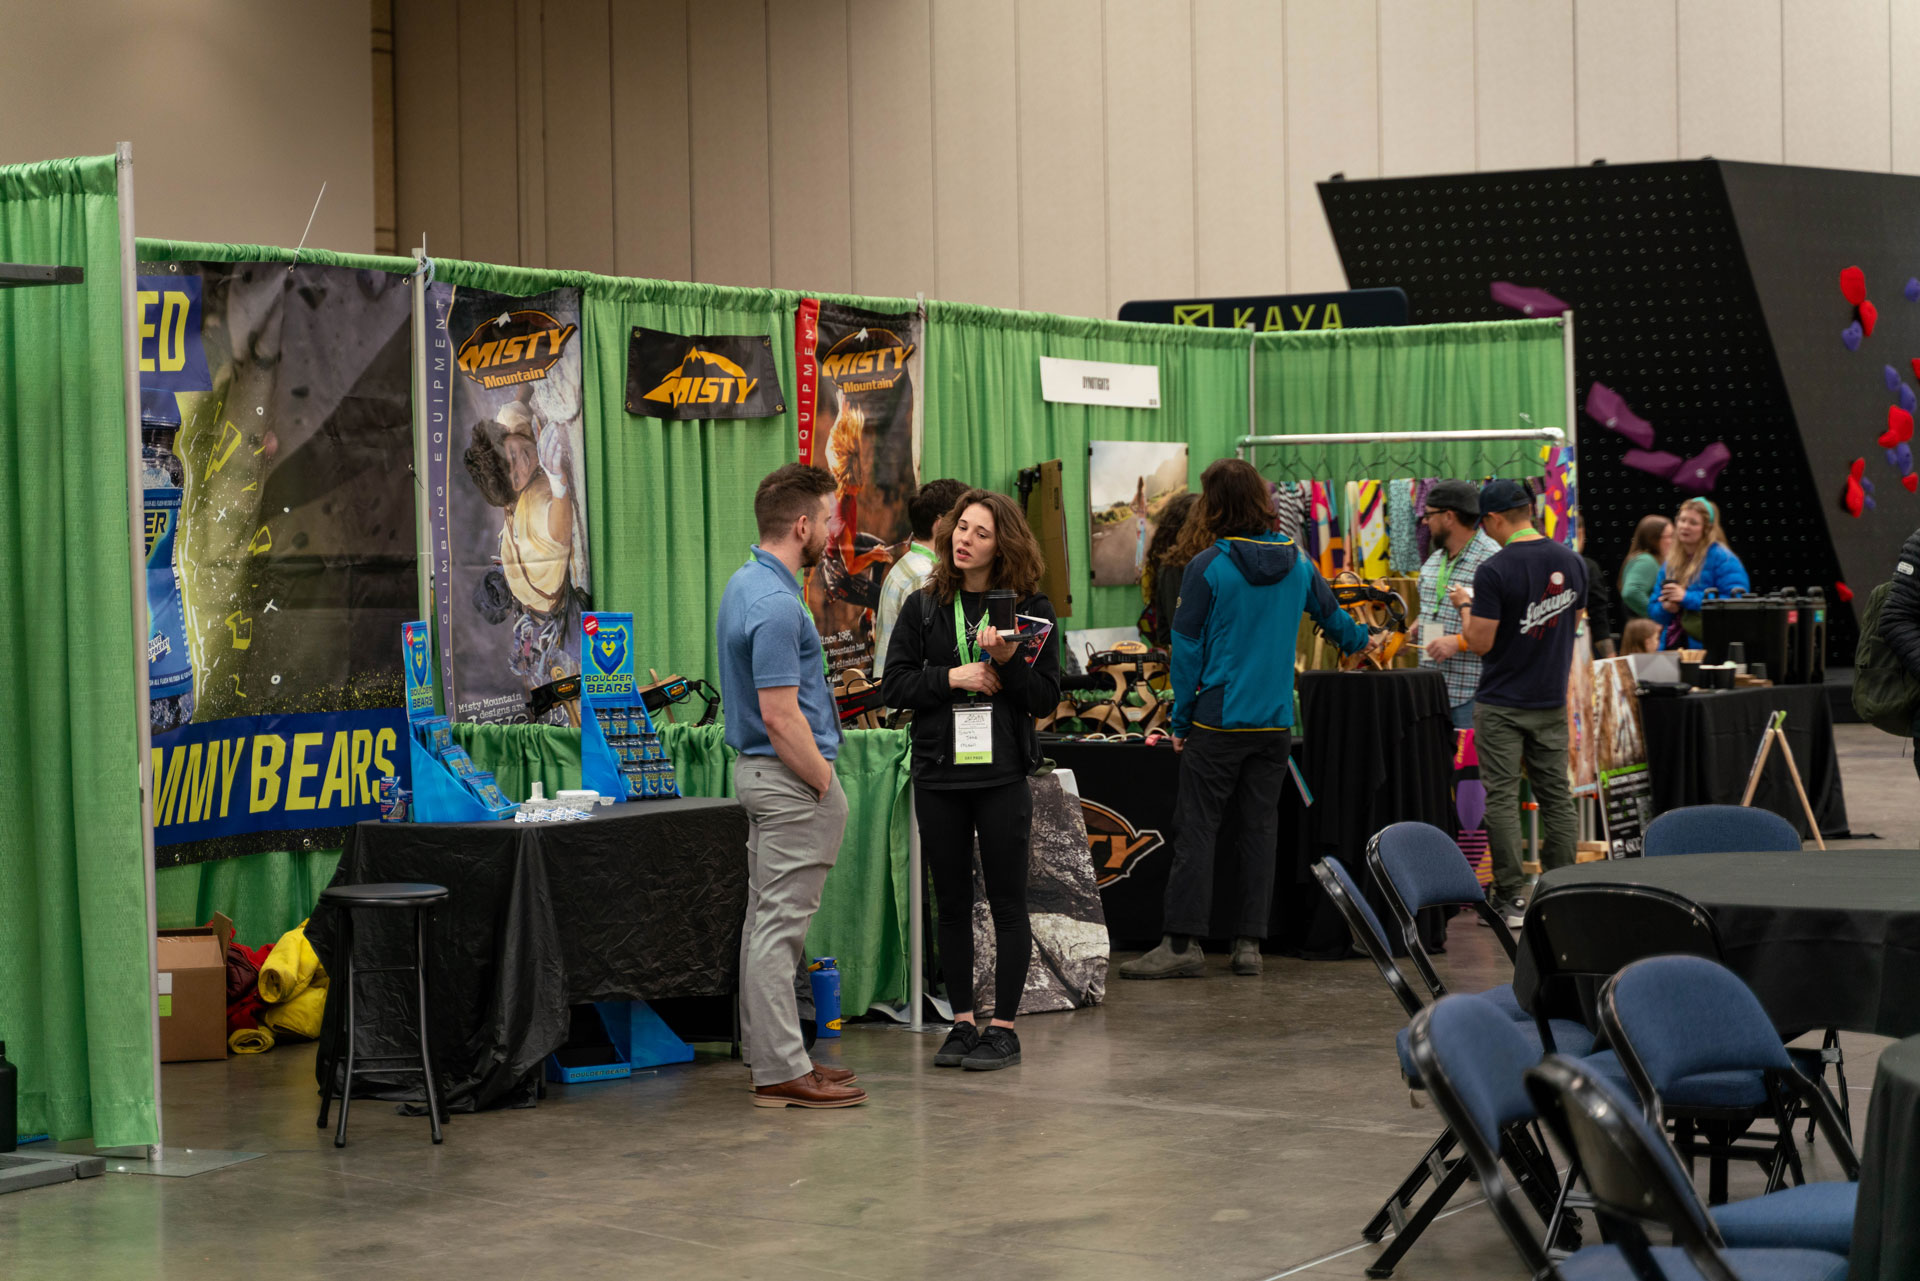 Exhibit Hall at the Expo